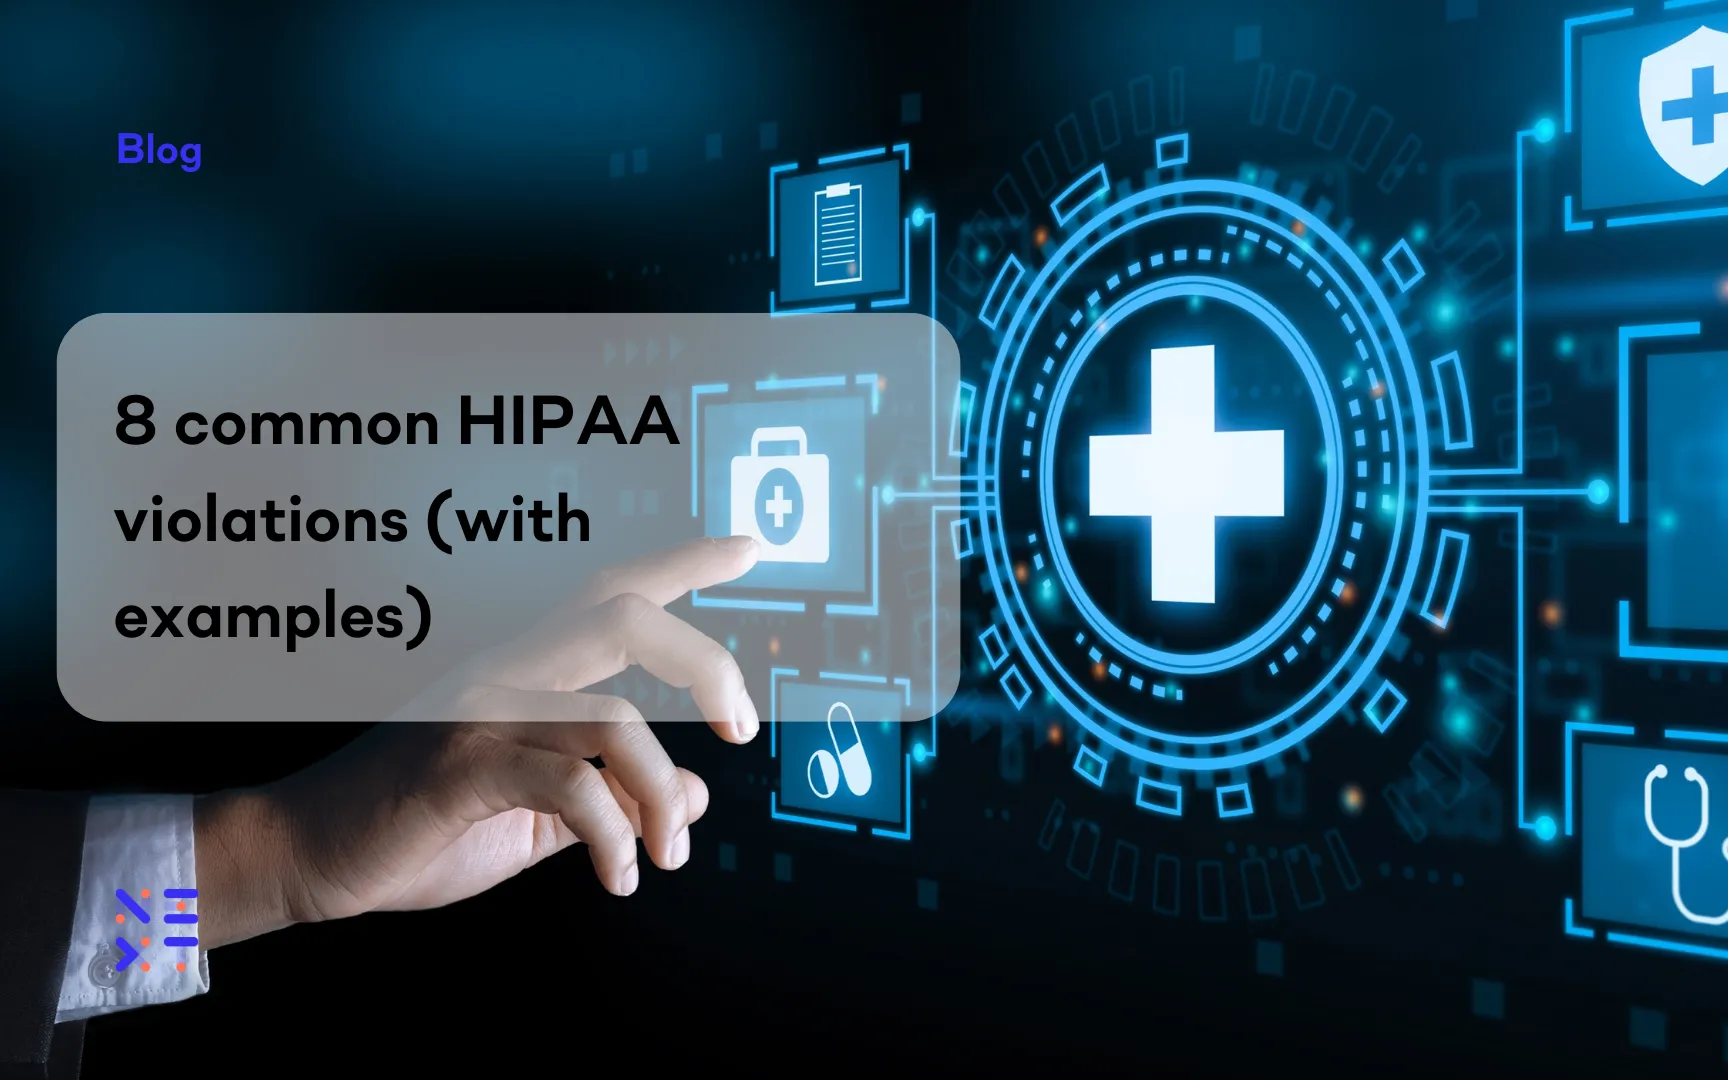 8 common HIPAA violations (with examples)